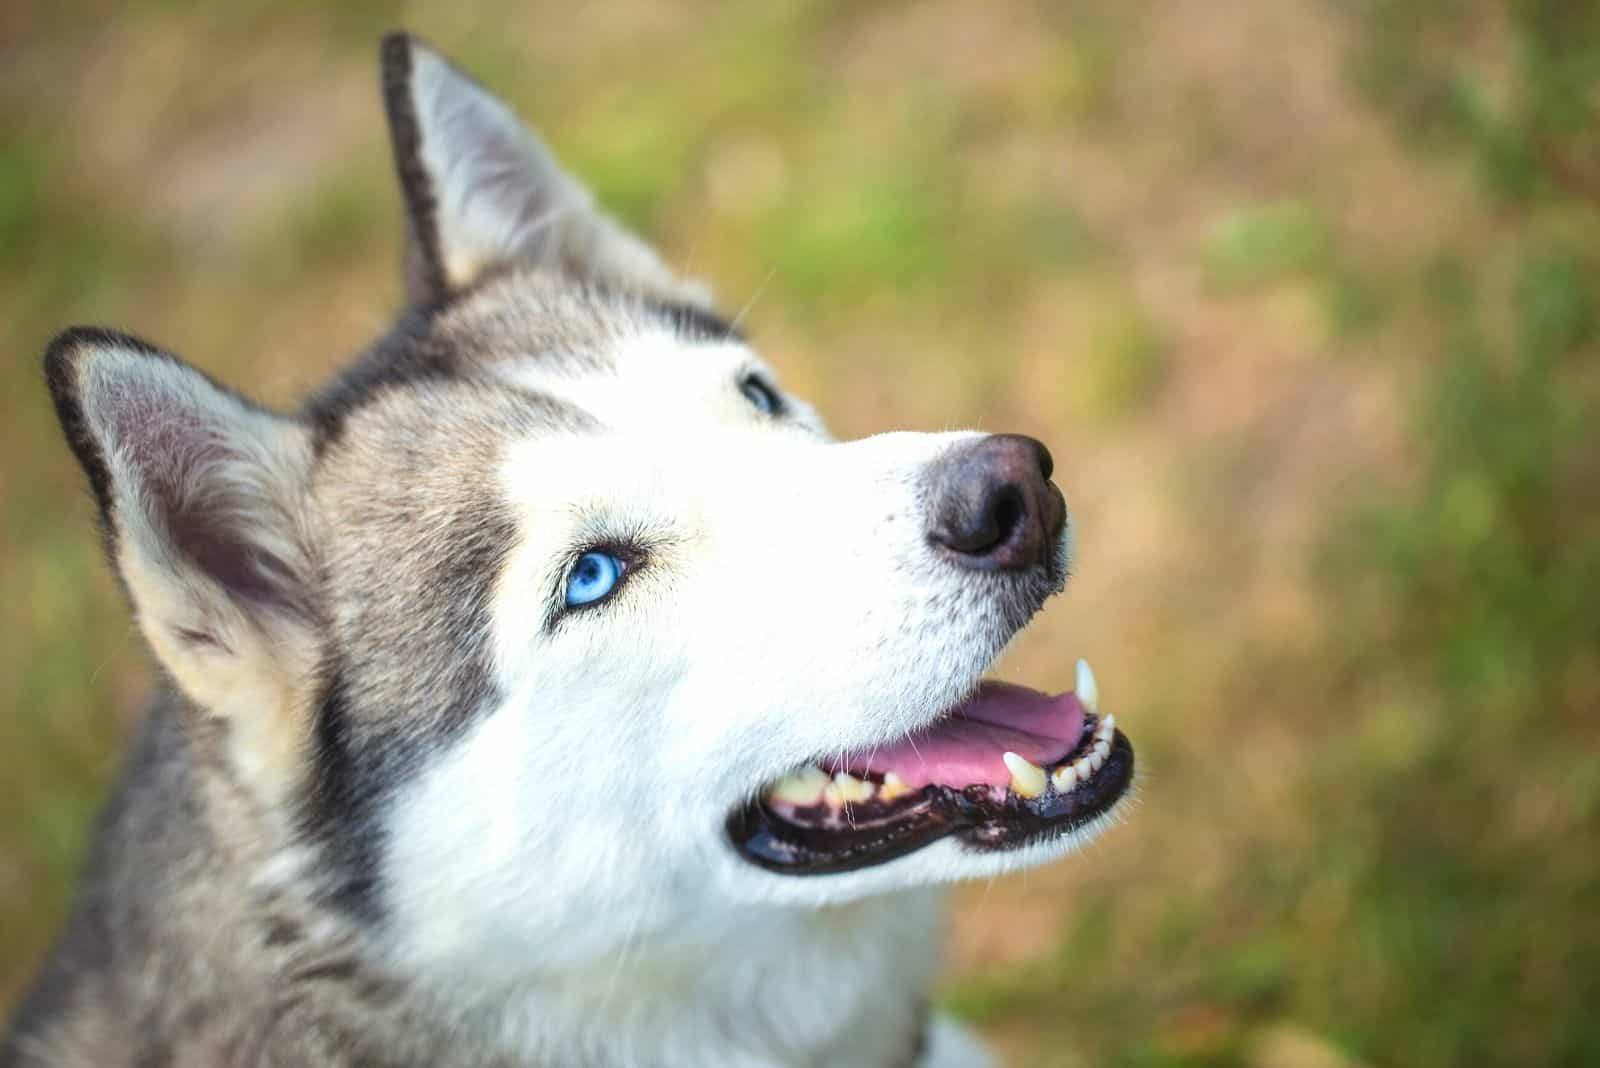 siberian husky in close up image looking up